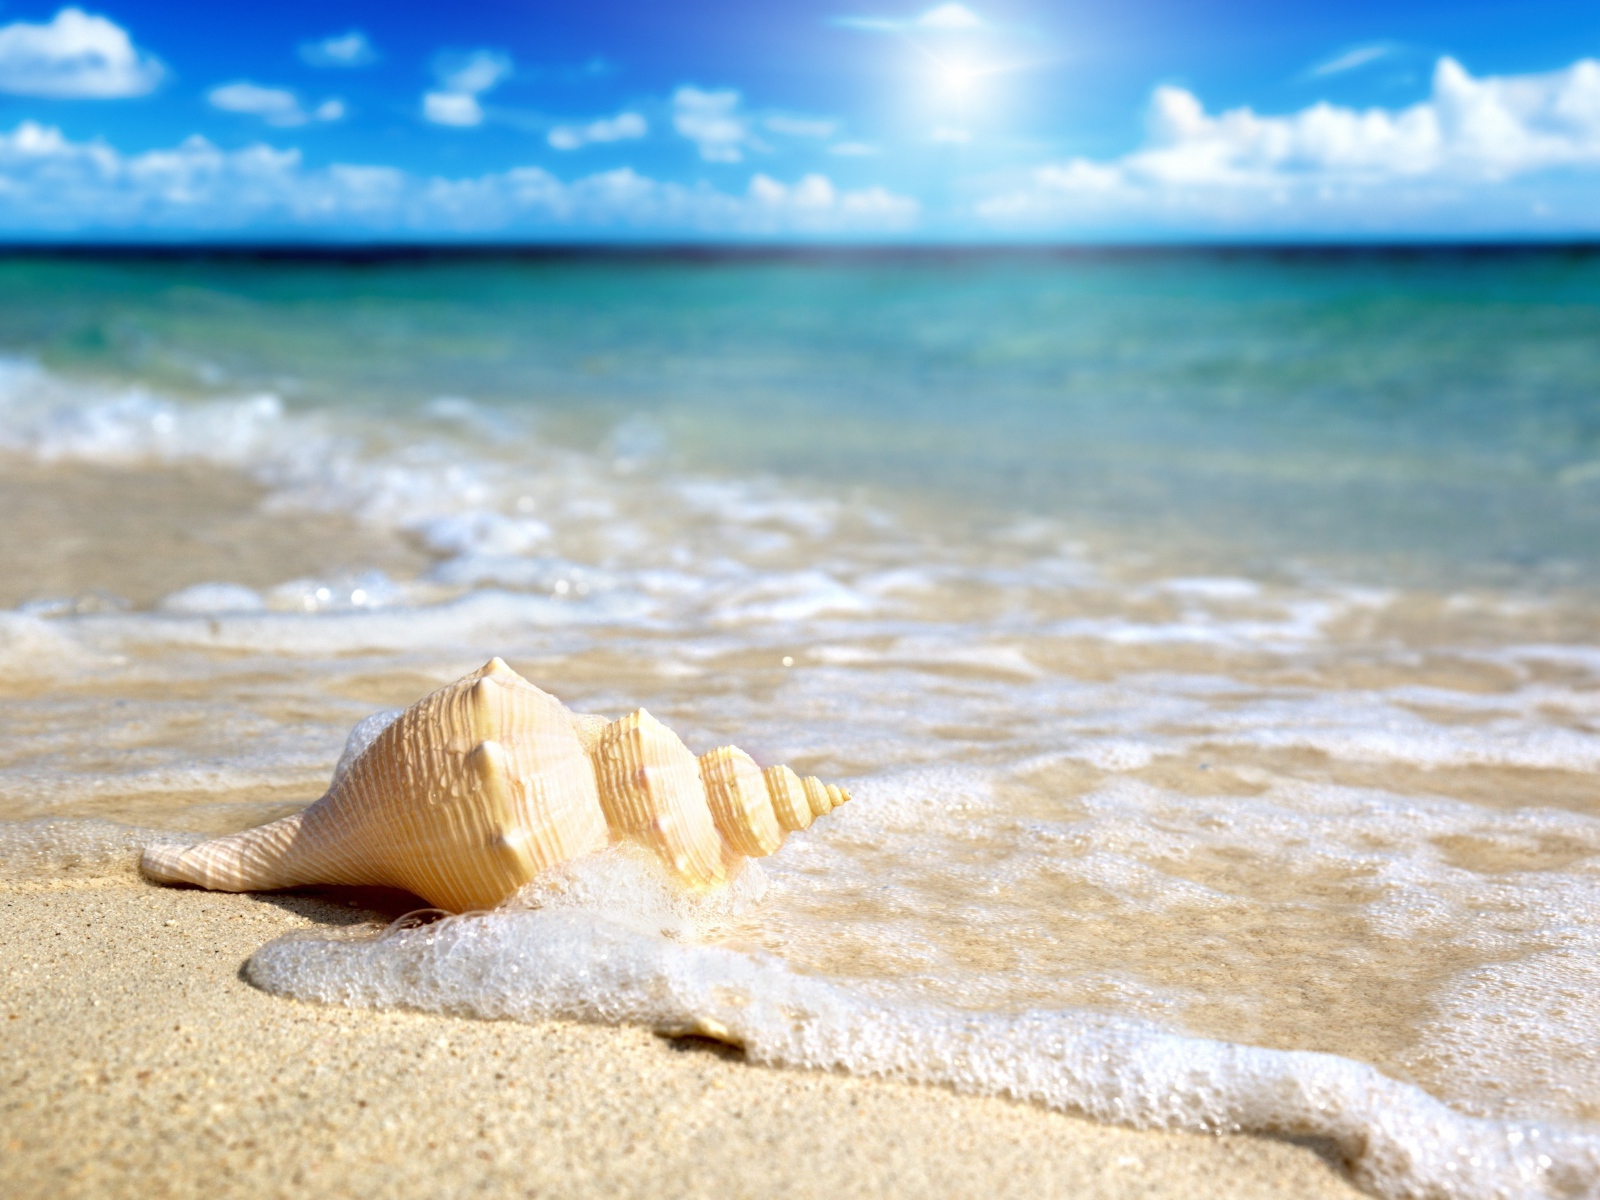 A large white shell lies on the white sand in the foam